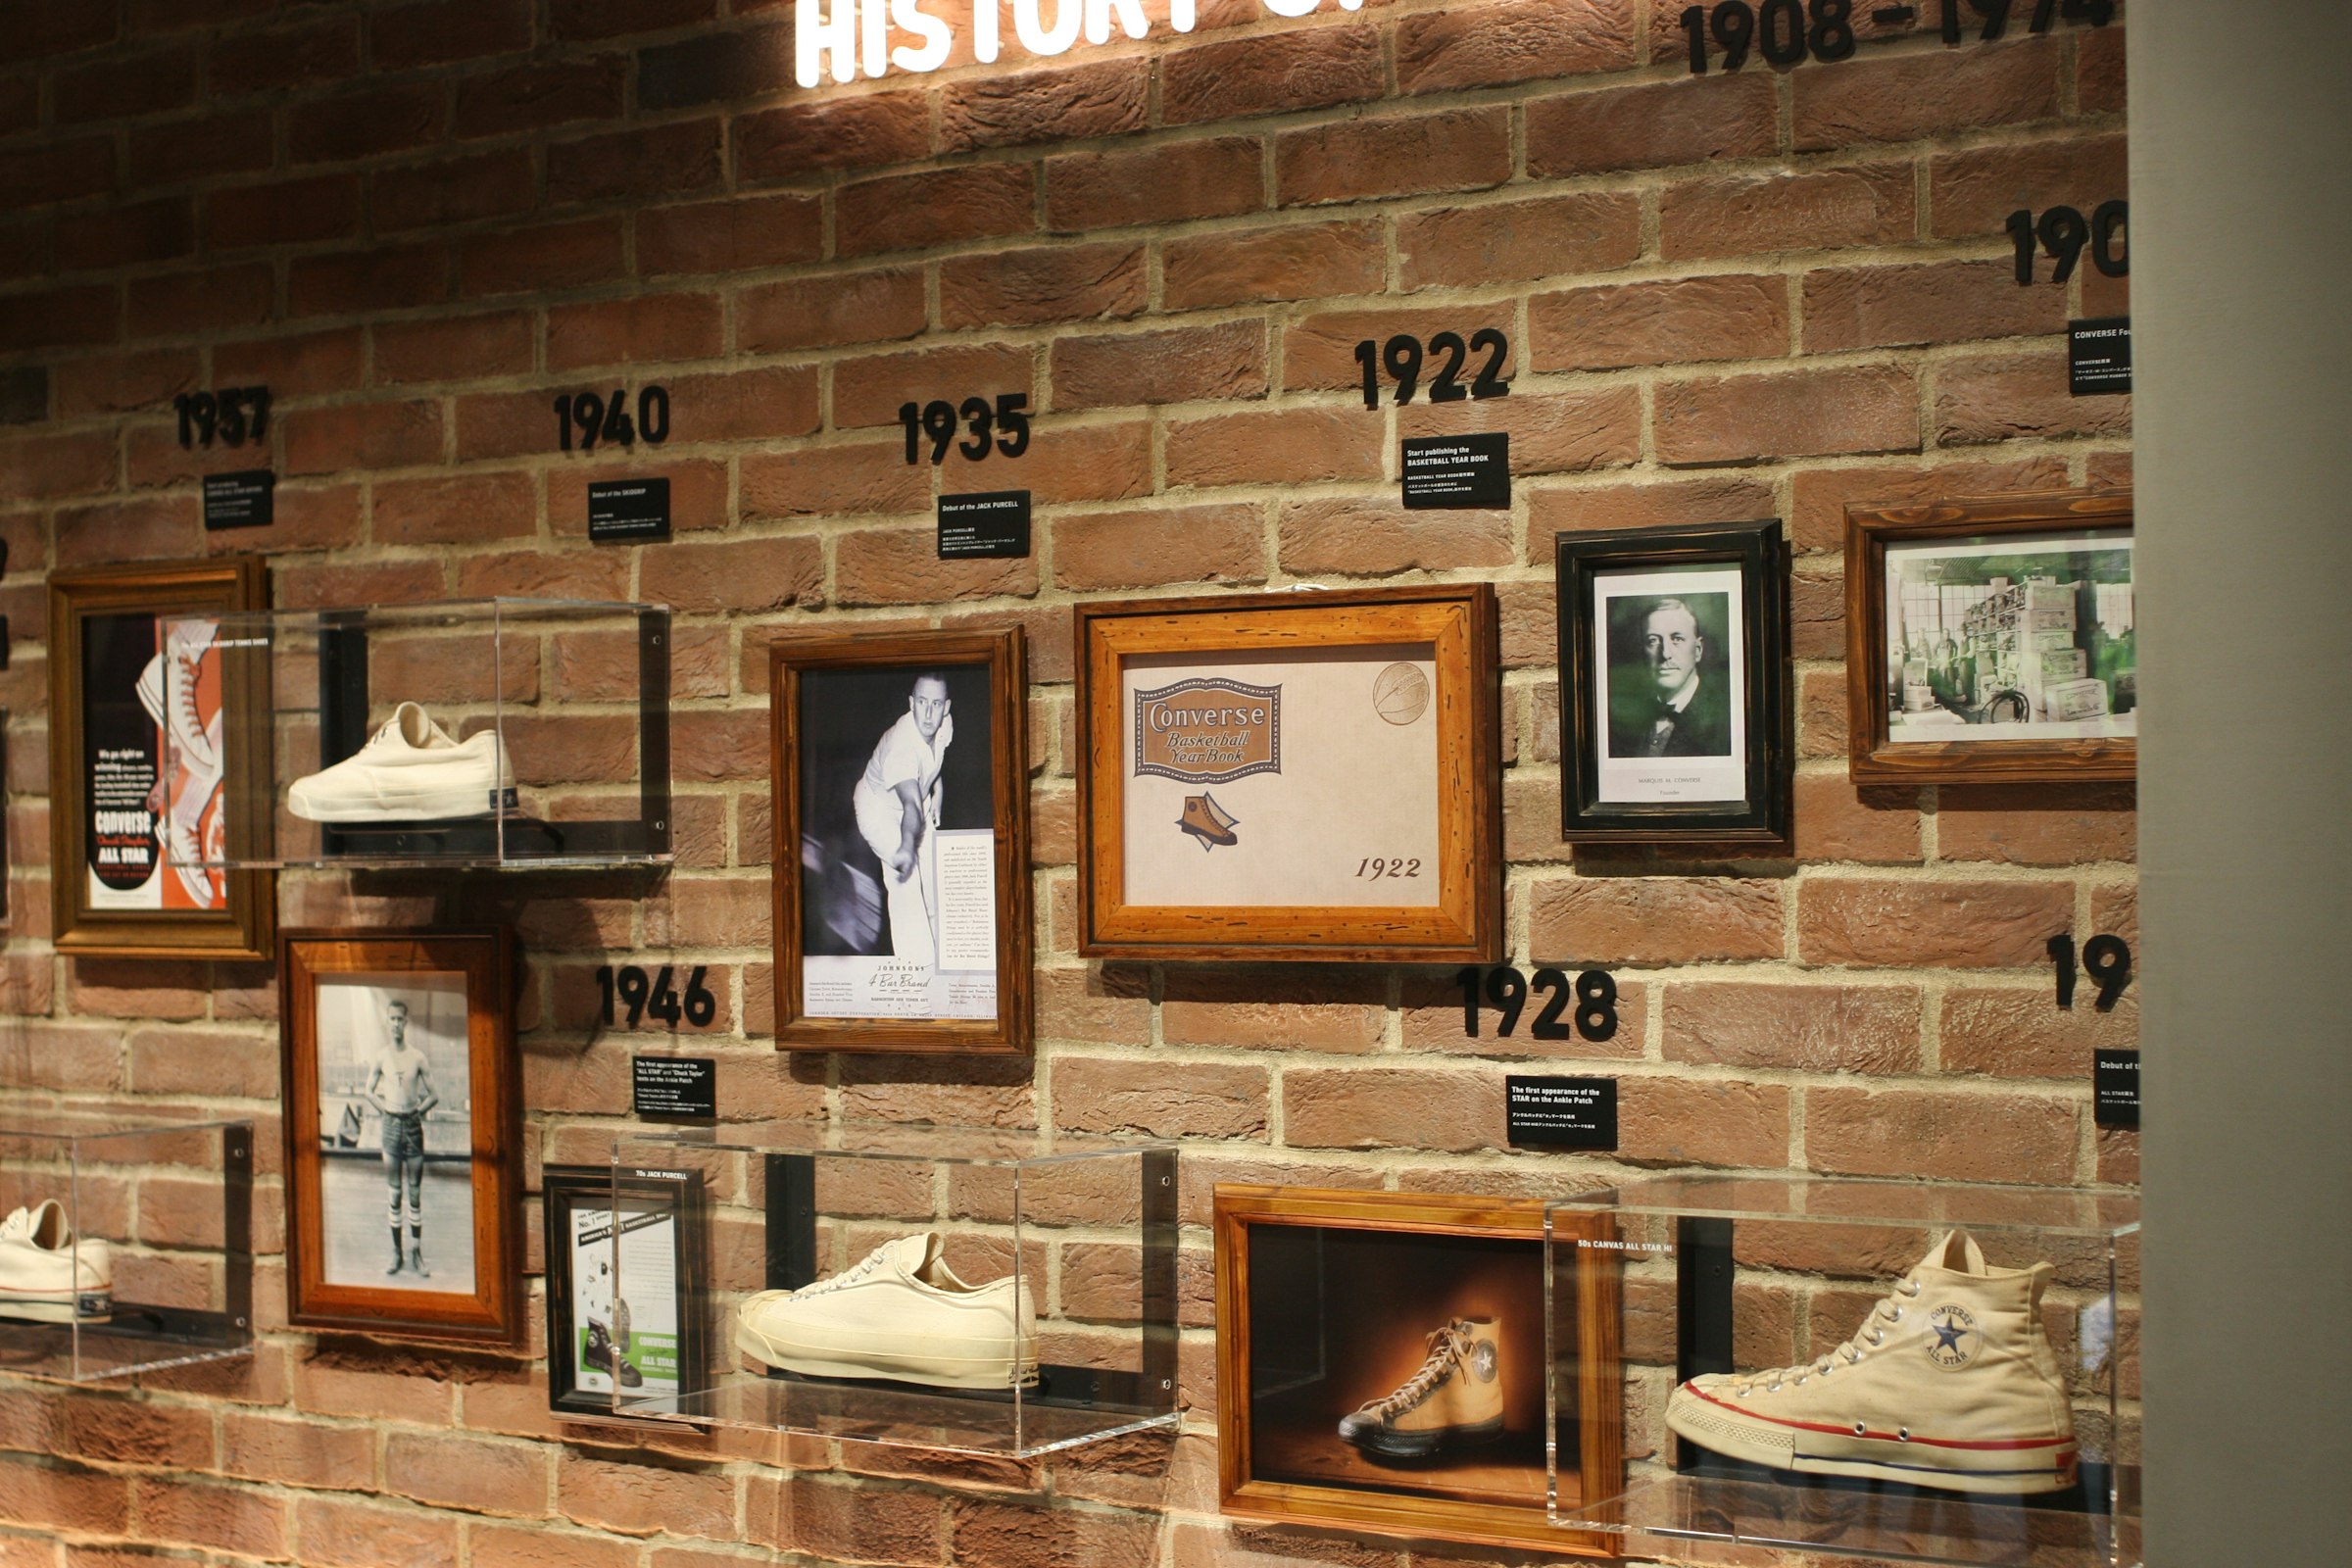 A section of the Converse Japan office displays its historical journey alongside valuable archives